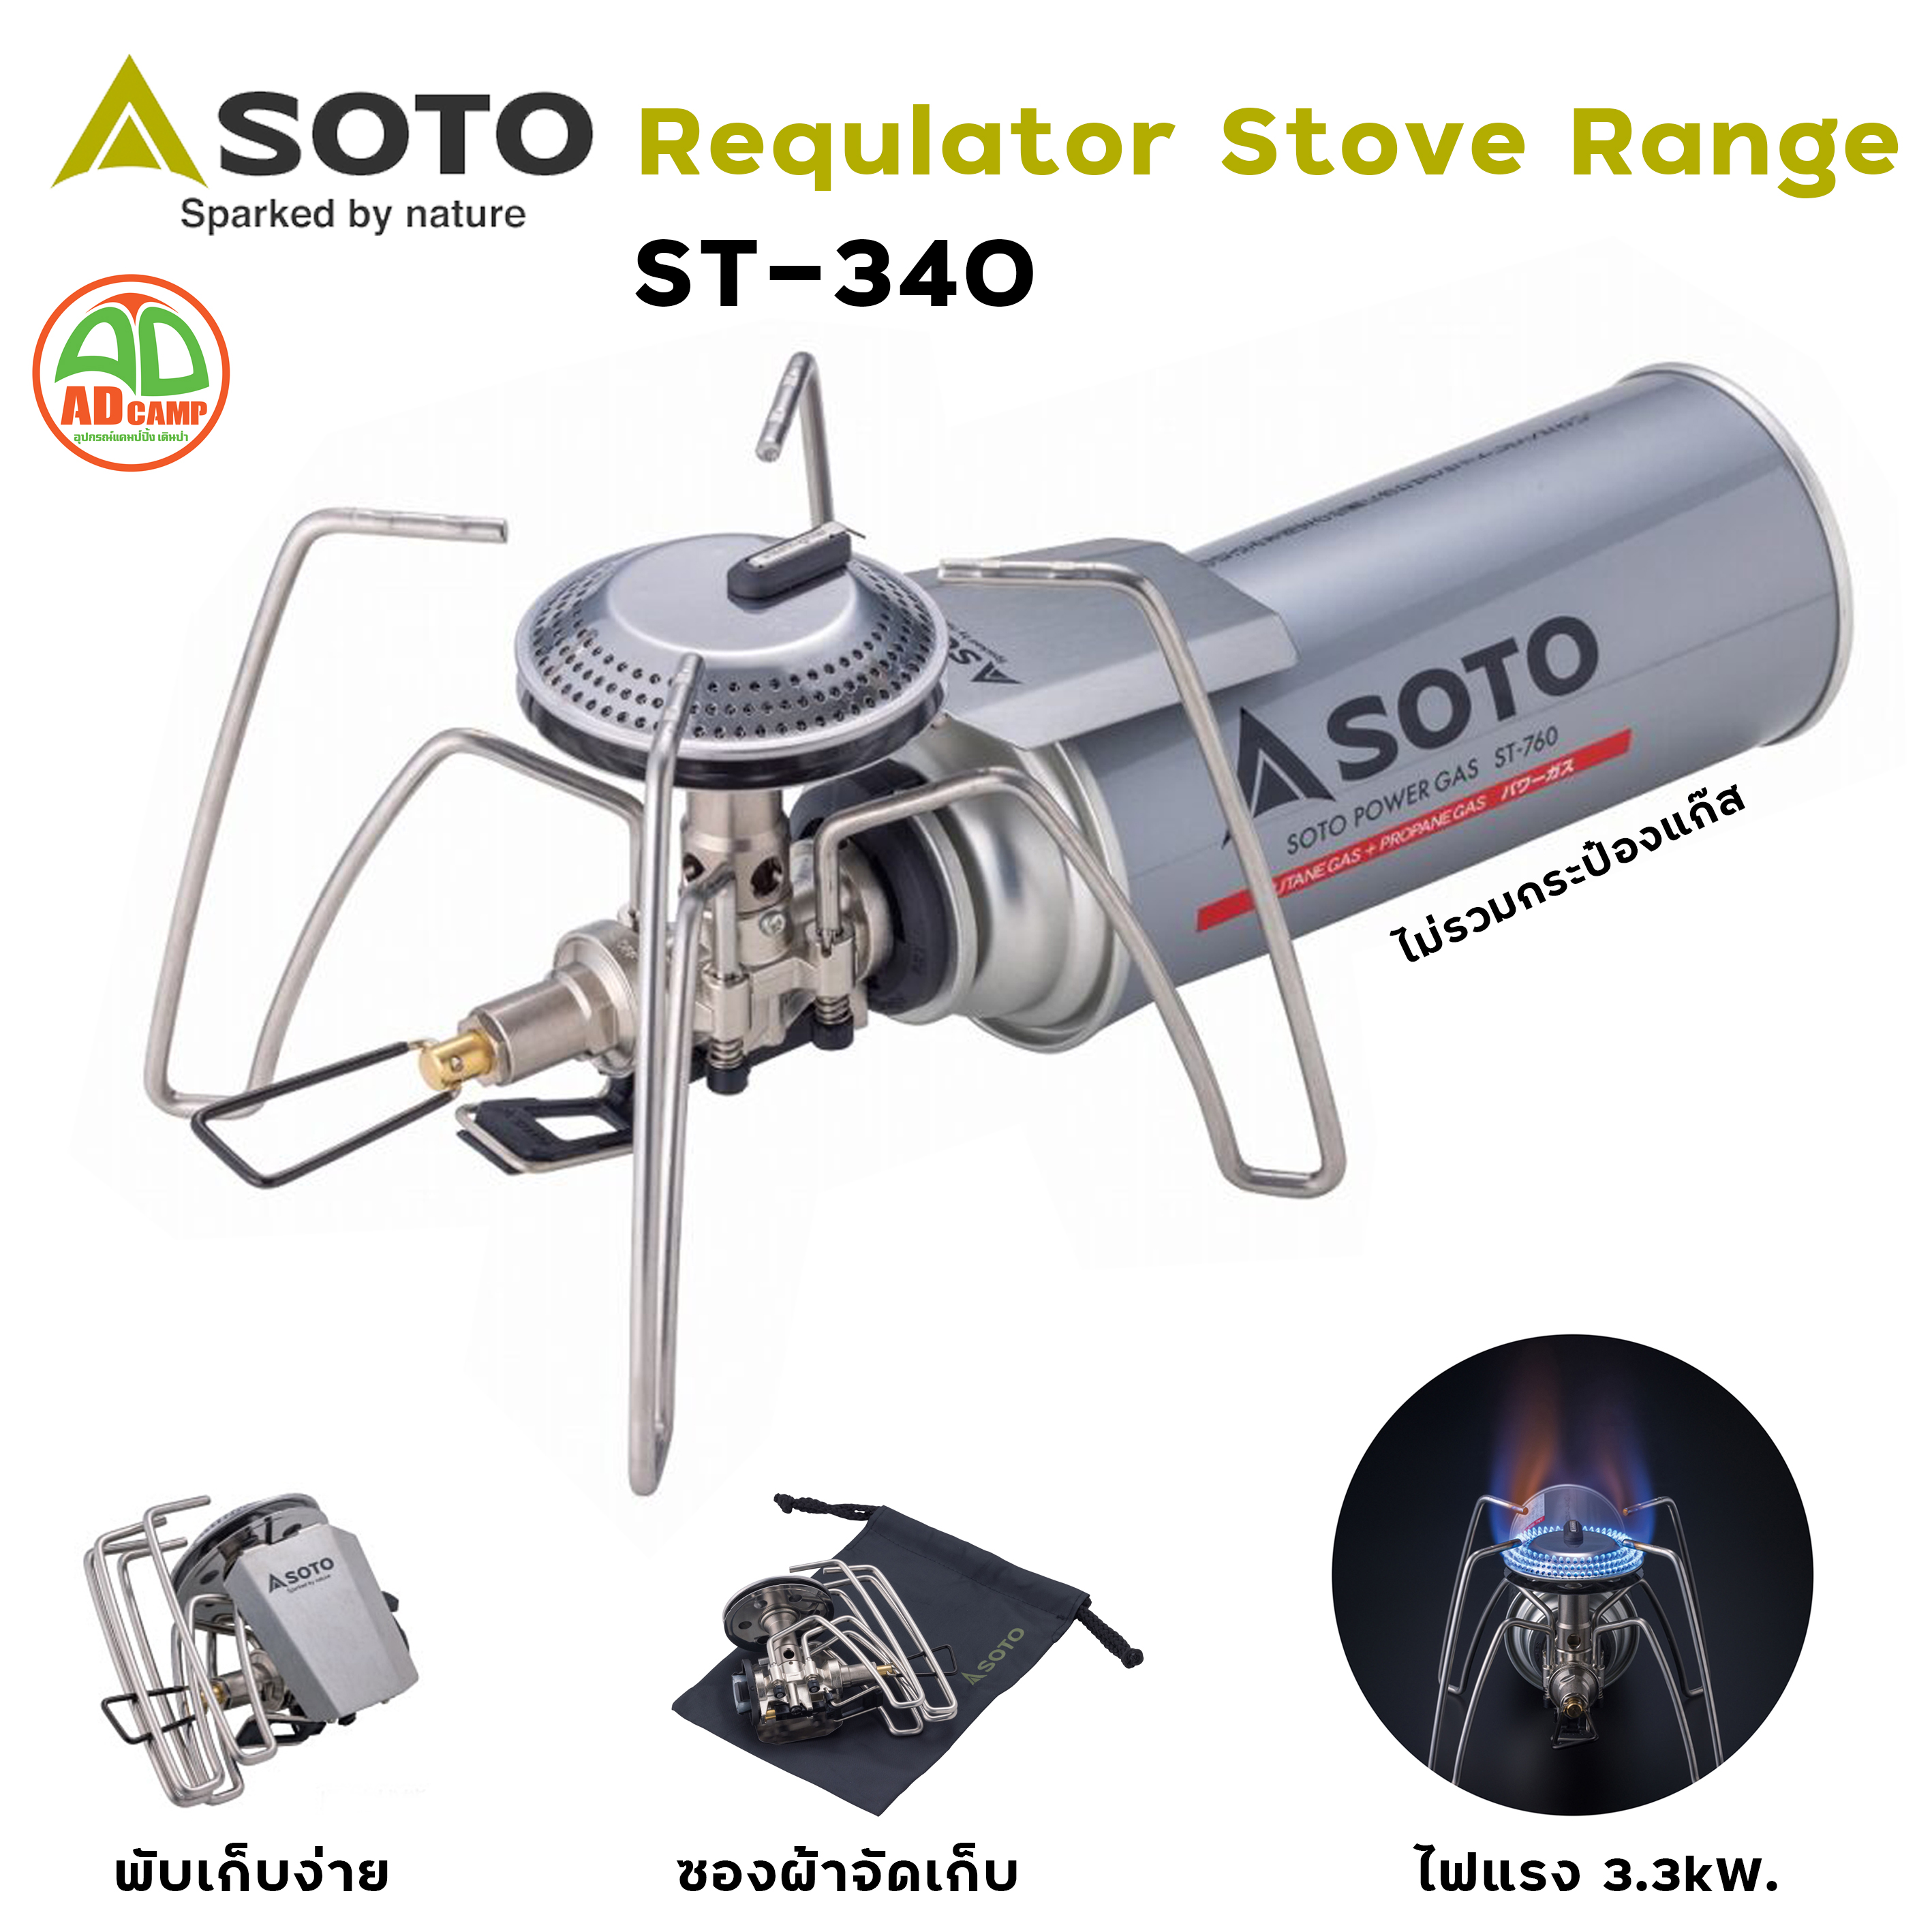 SOTO ST-AS310DY Regulator Stove (30th Anniversary Limited Edition)